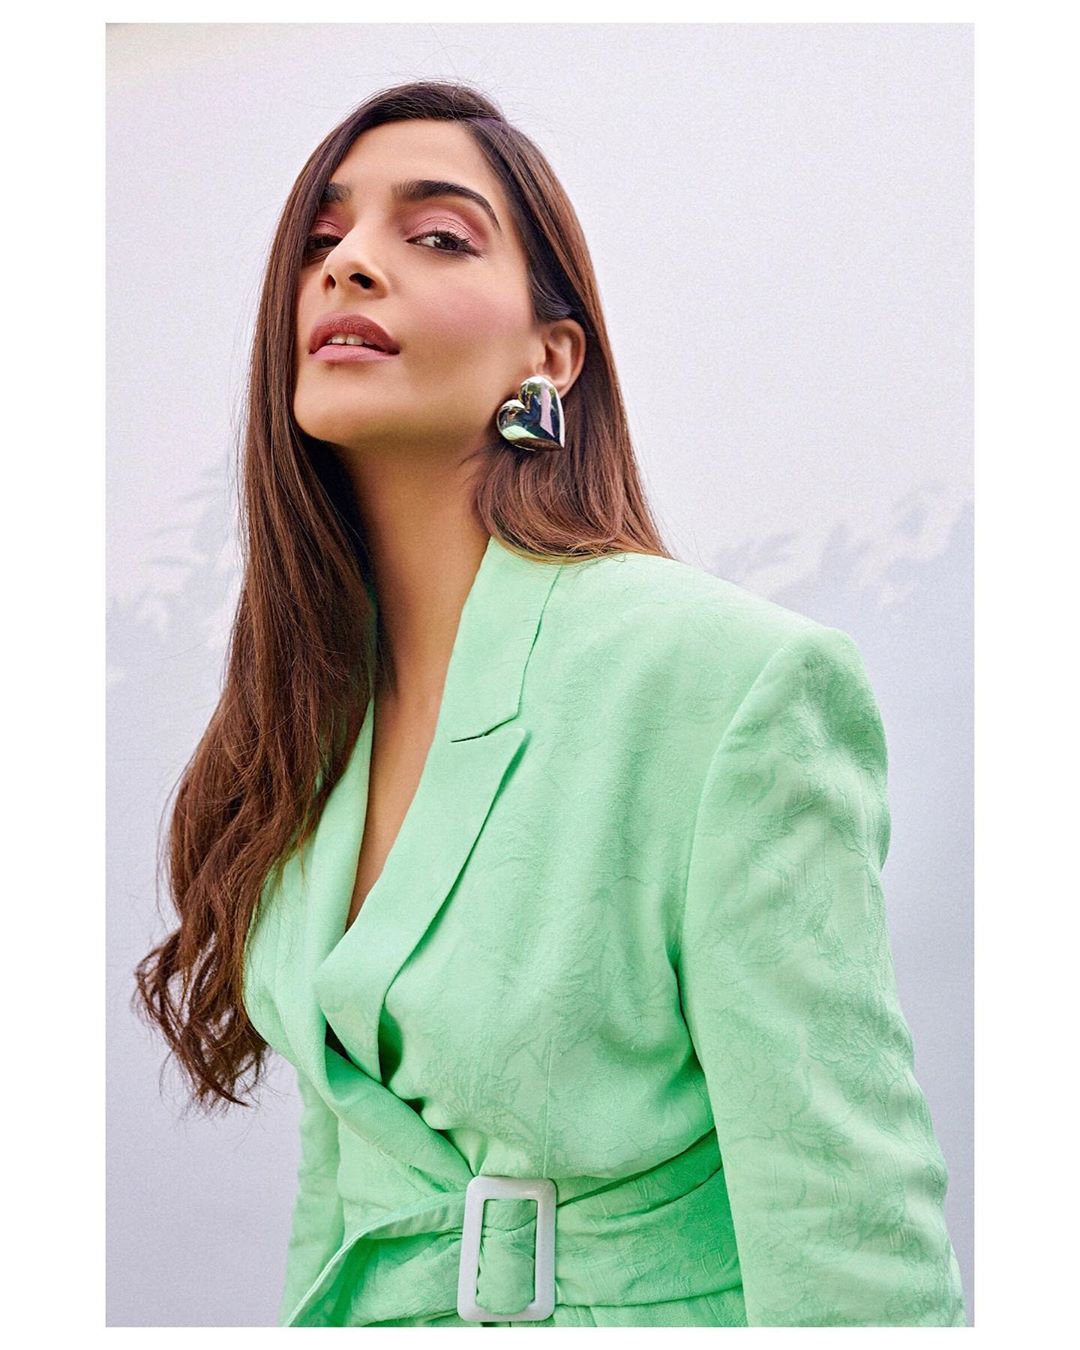 Sonam Kapoor Chaos makes the muse!Outfit: Earrings: Shoes: Styled by Wallpaper